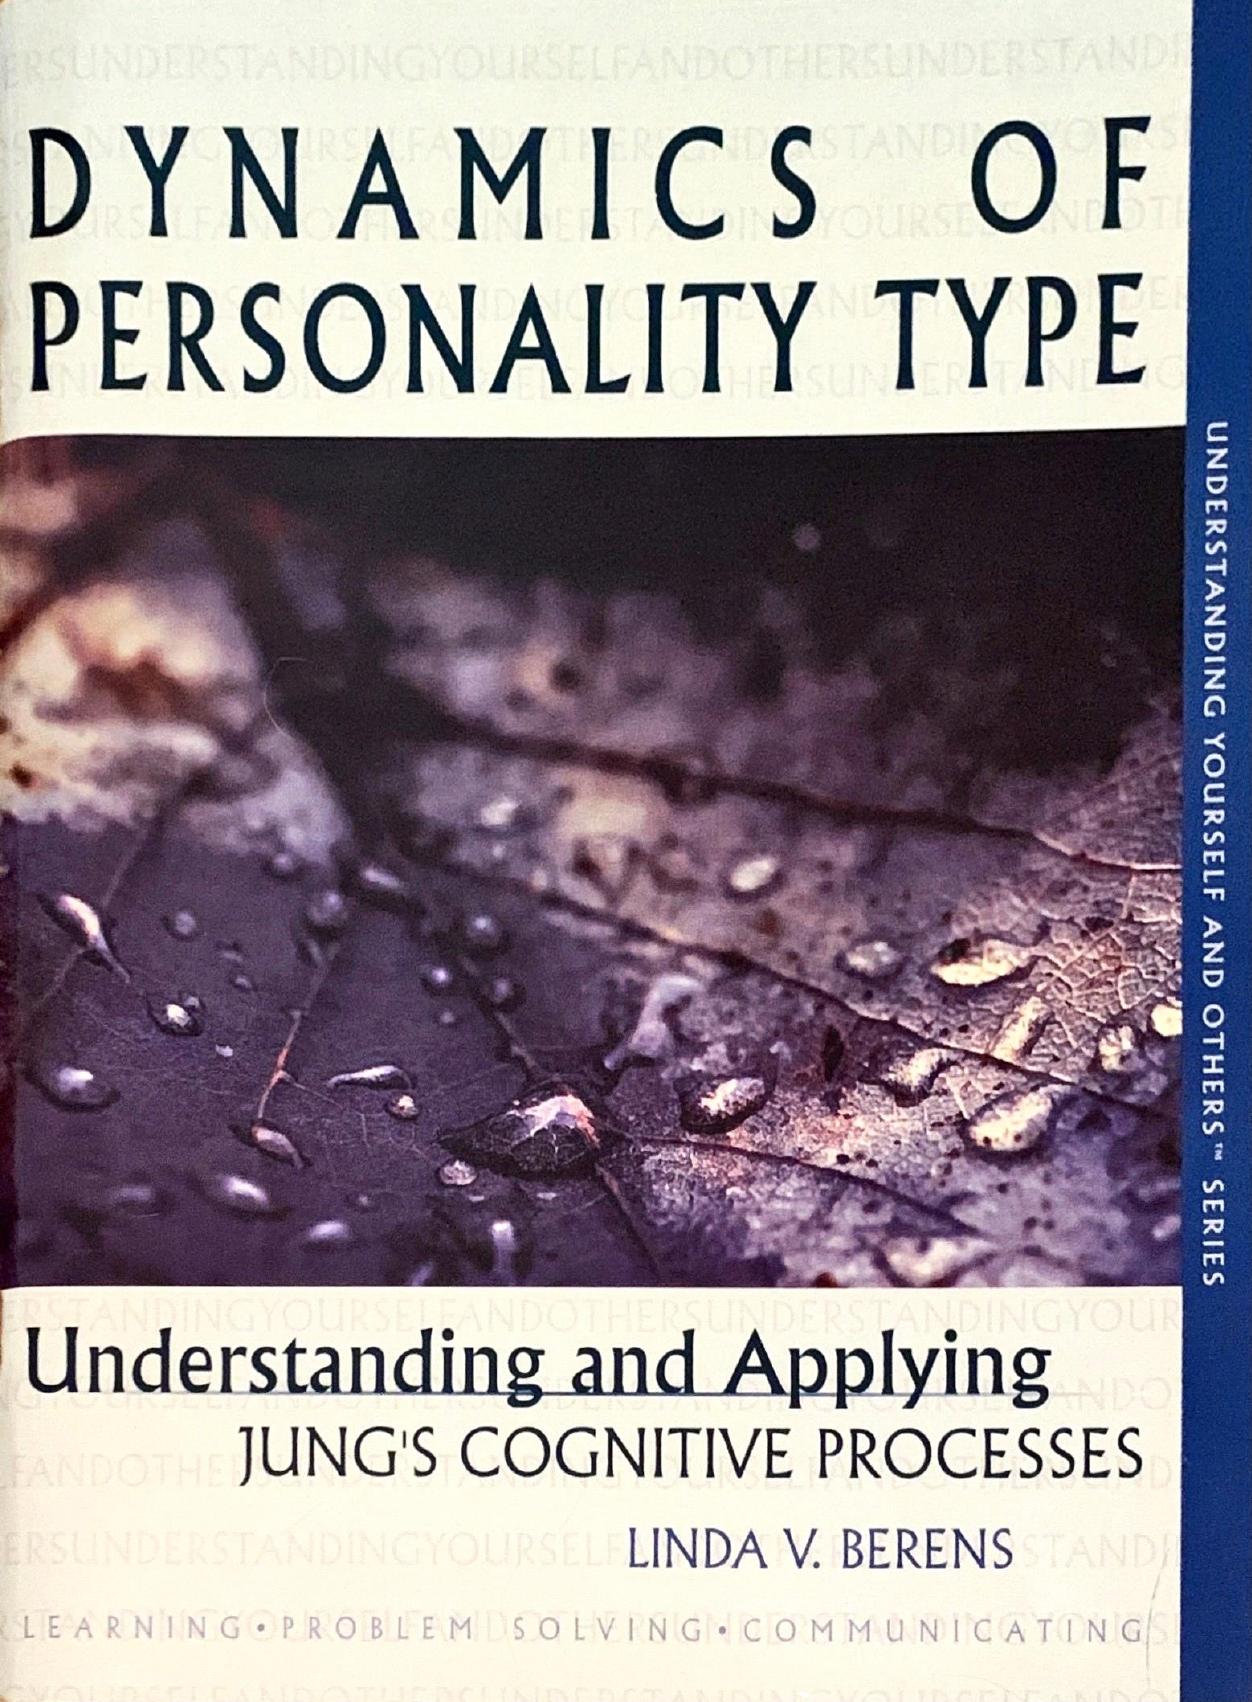 Dynamics of Personality Type: Understanding and Applying Jung's Cognitive Processes